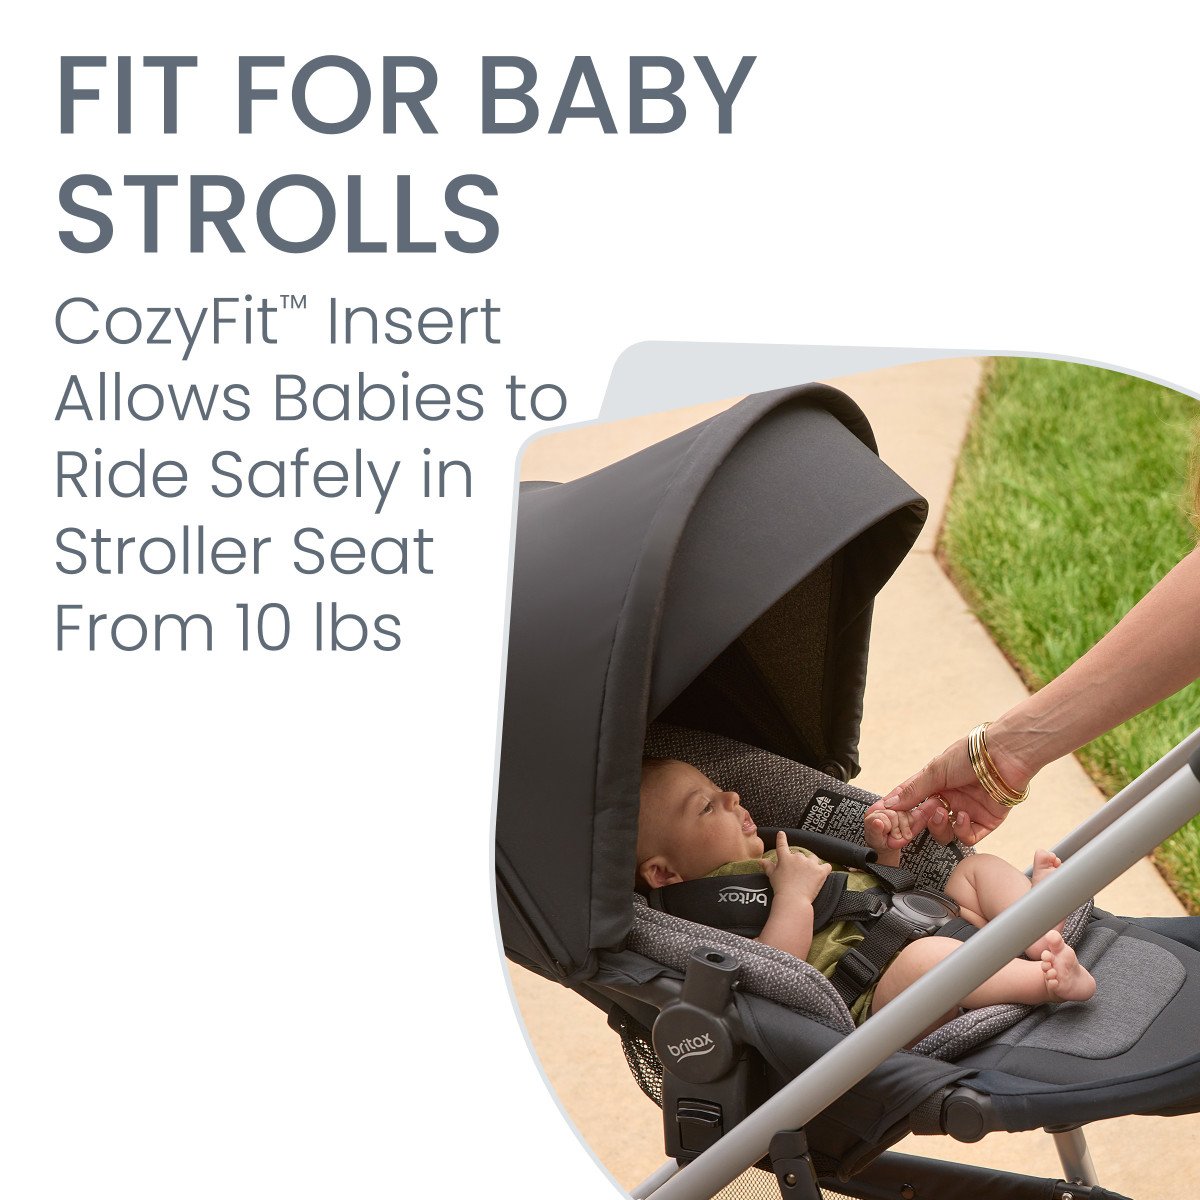 CozyFit Insert allows 10lb or more baby to ride safely